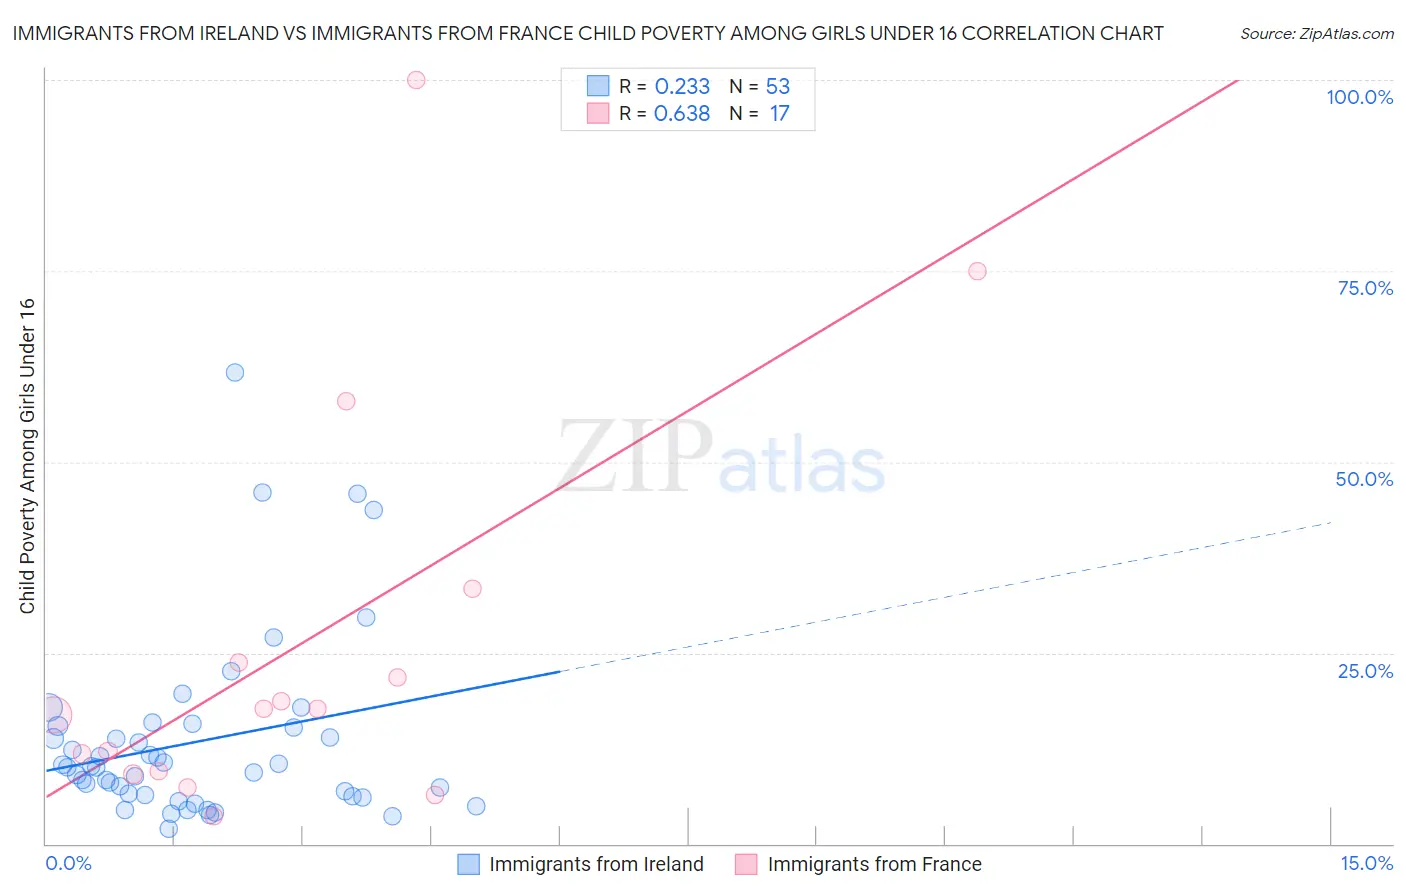 Immigrants from Ireland vs Immigrants from France Child Poverty Among Girls Under 16